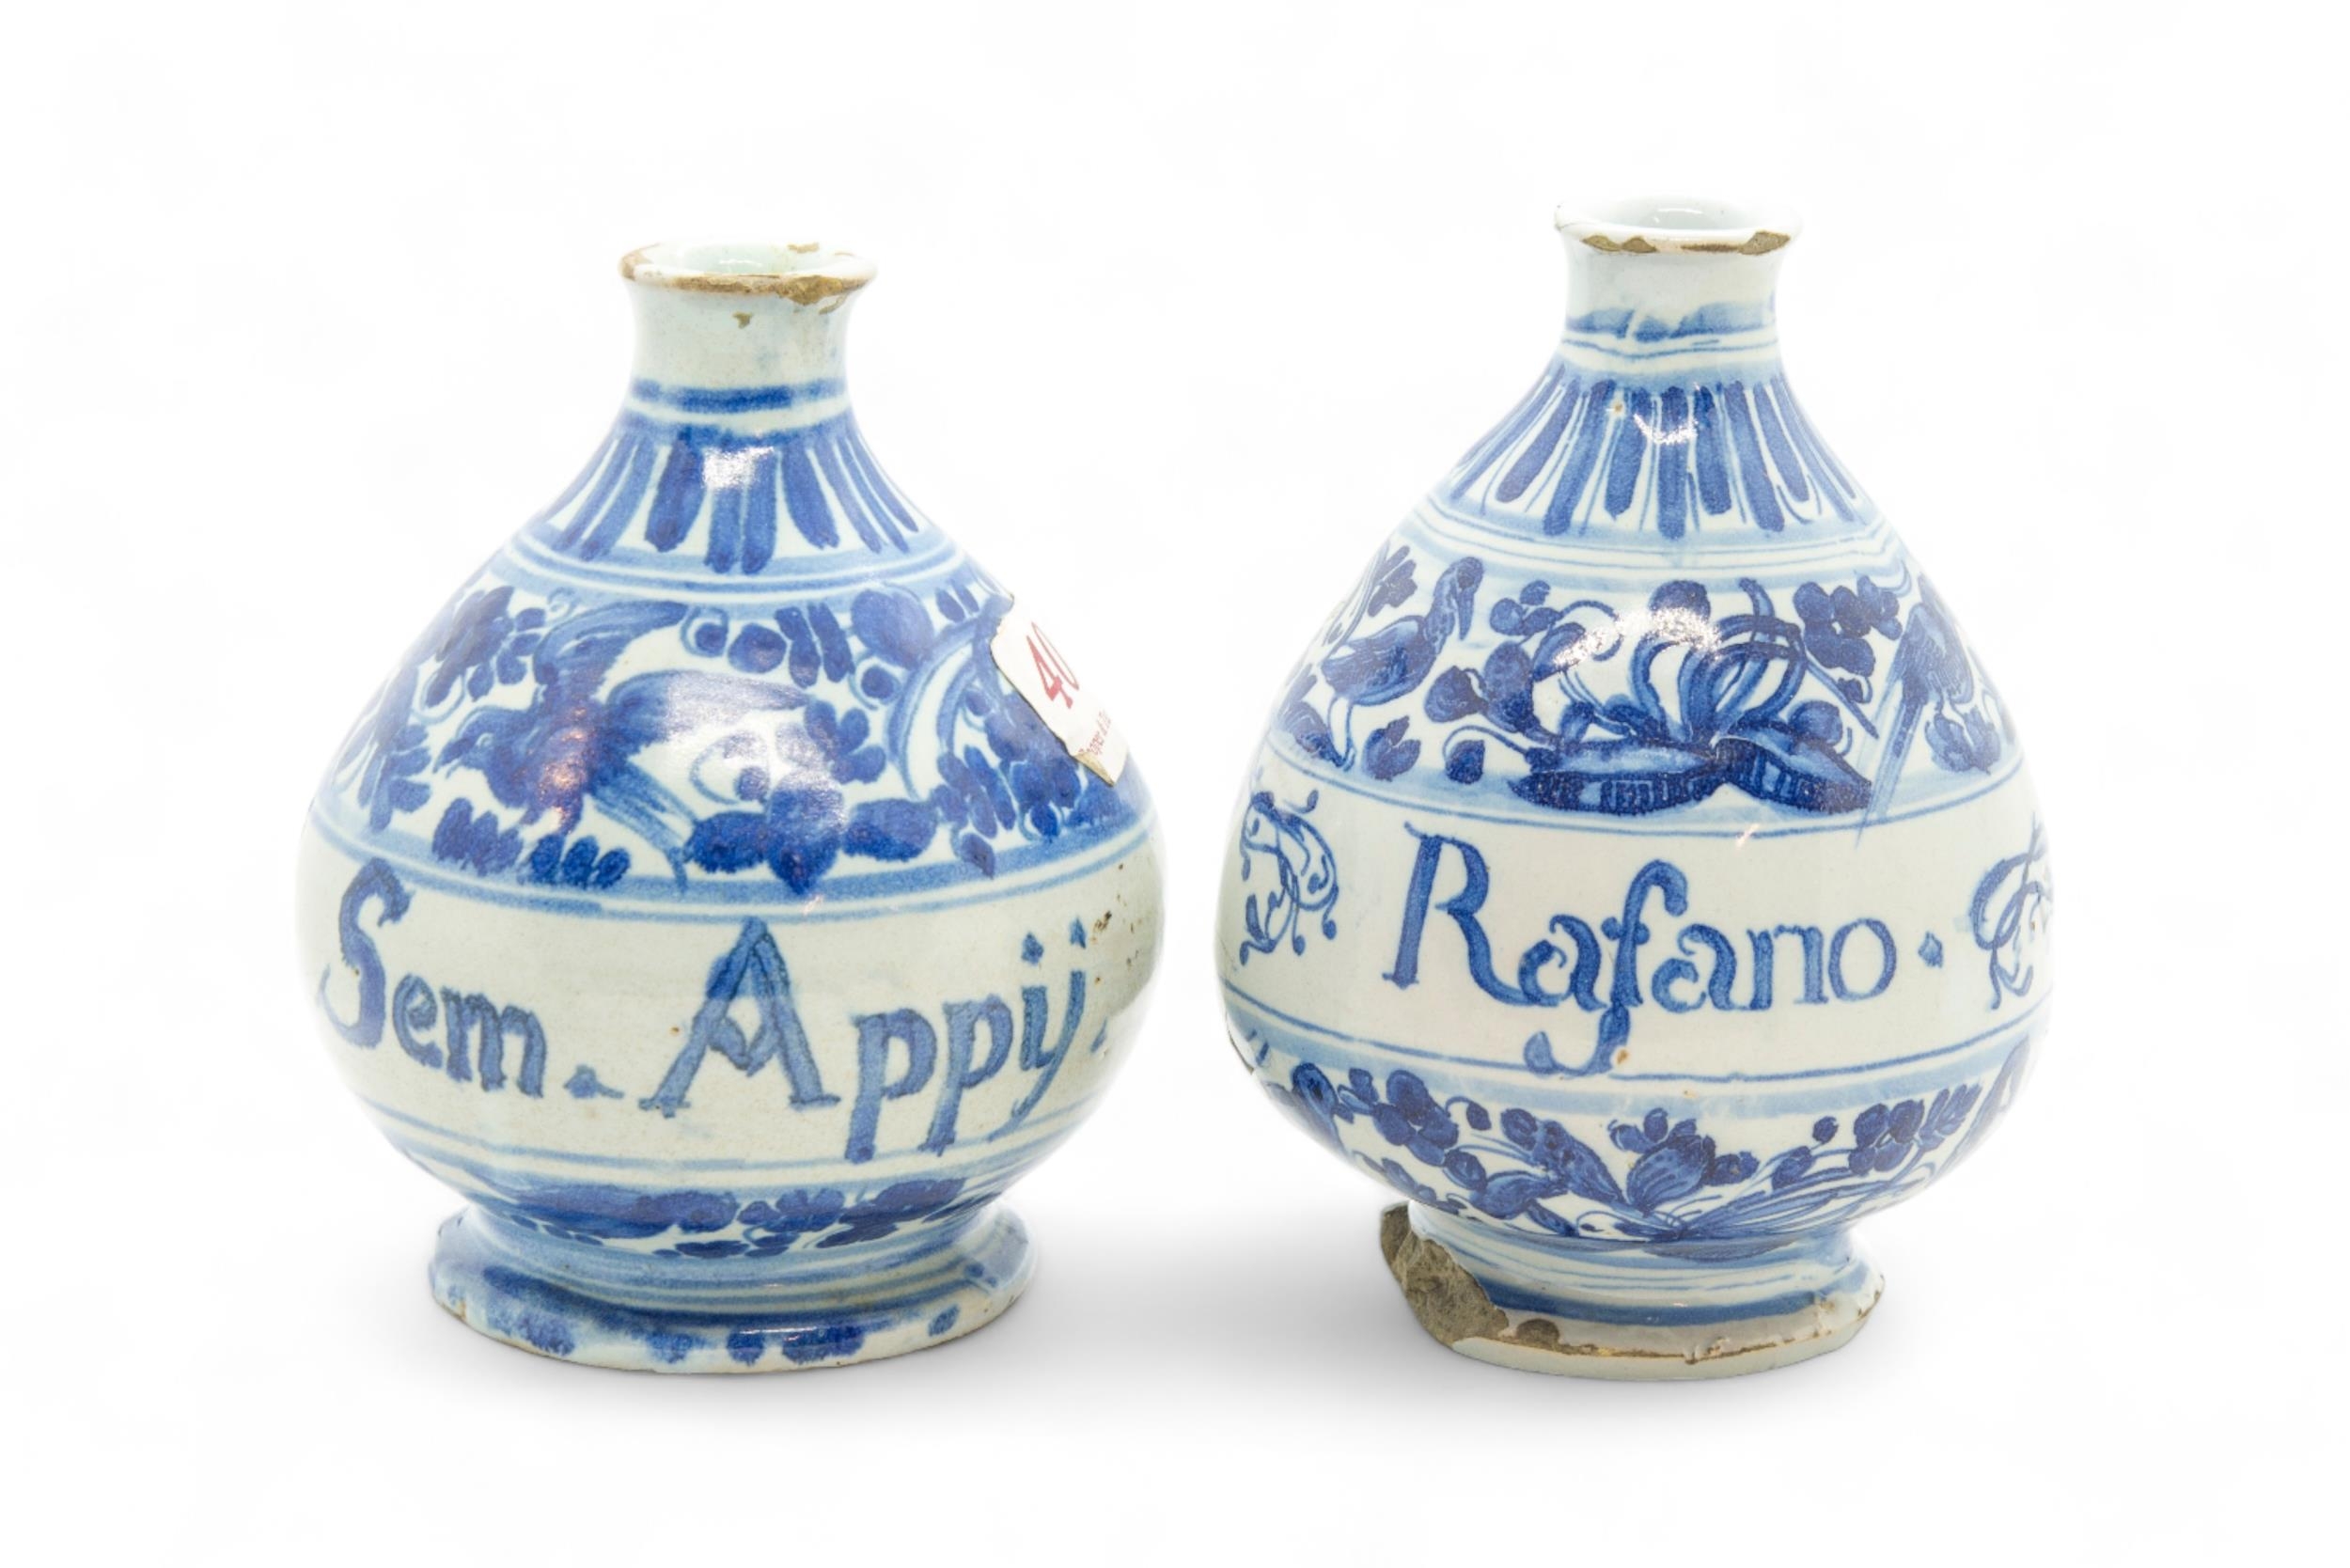 TWO PHARMACY BOTTLES 17th / 18th century, together with a Savona plate inscribed 'SERGIVS GALBA - Image 2 of 3